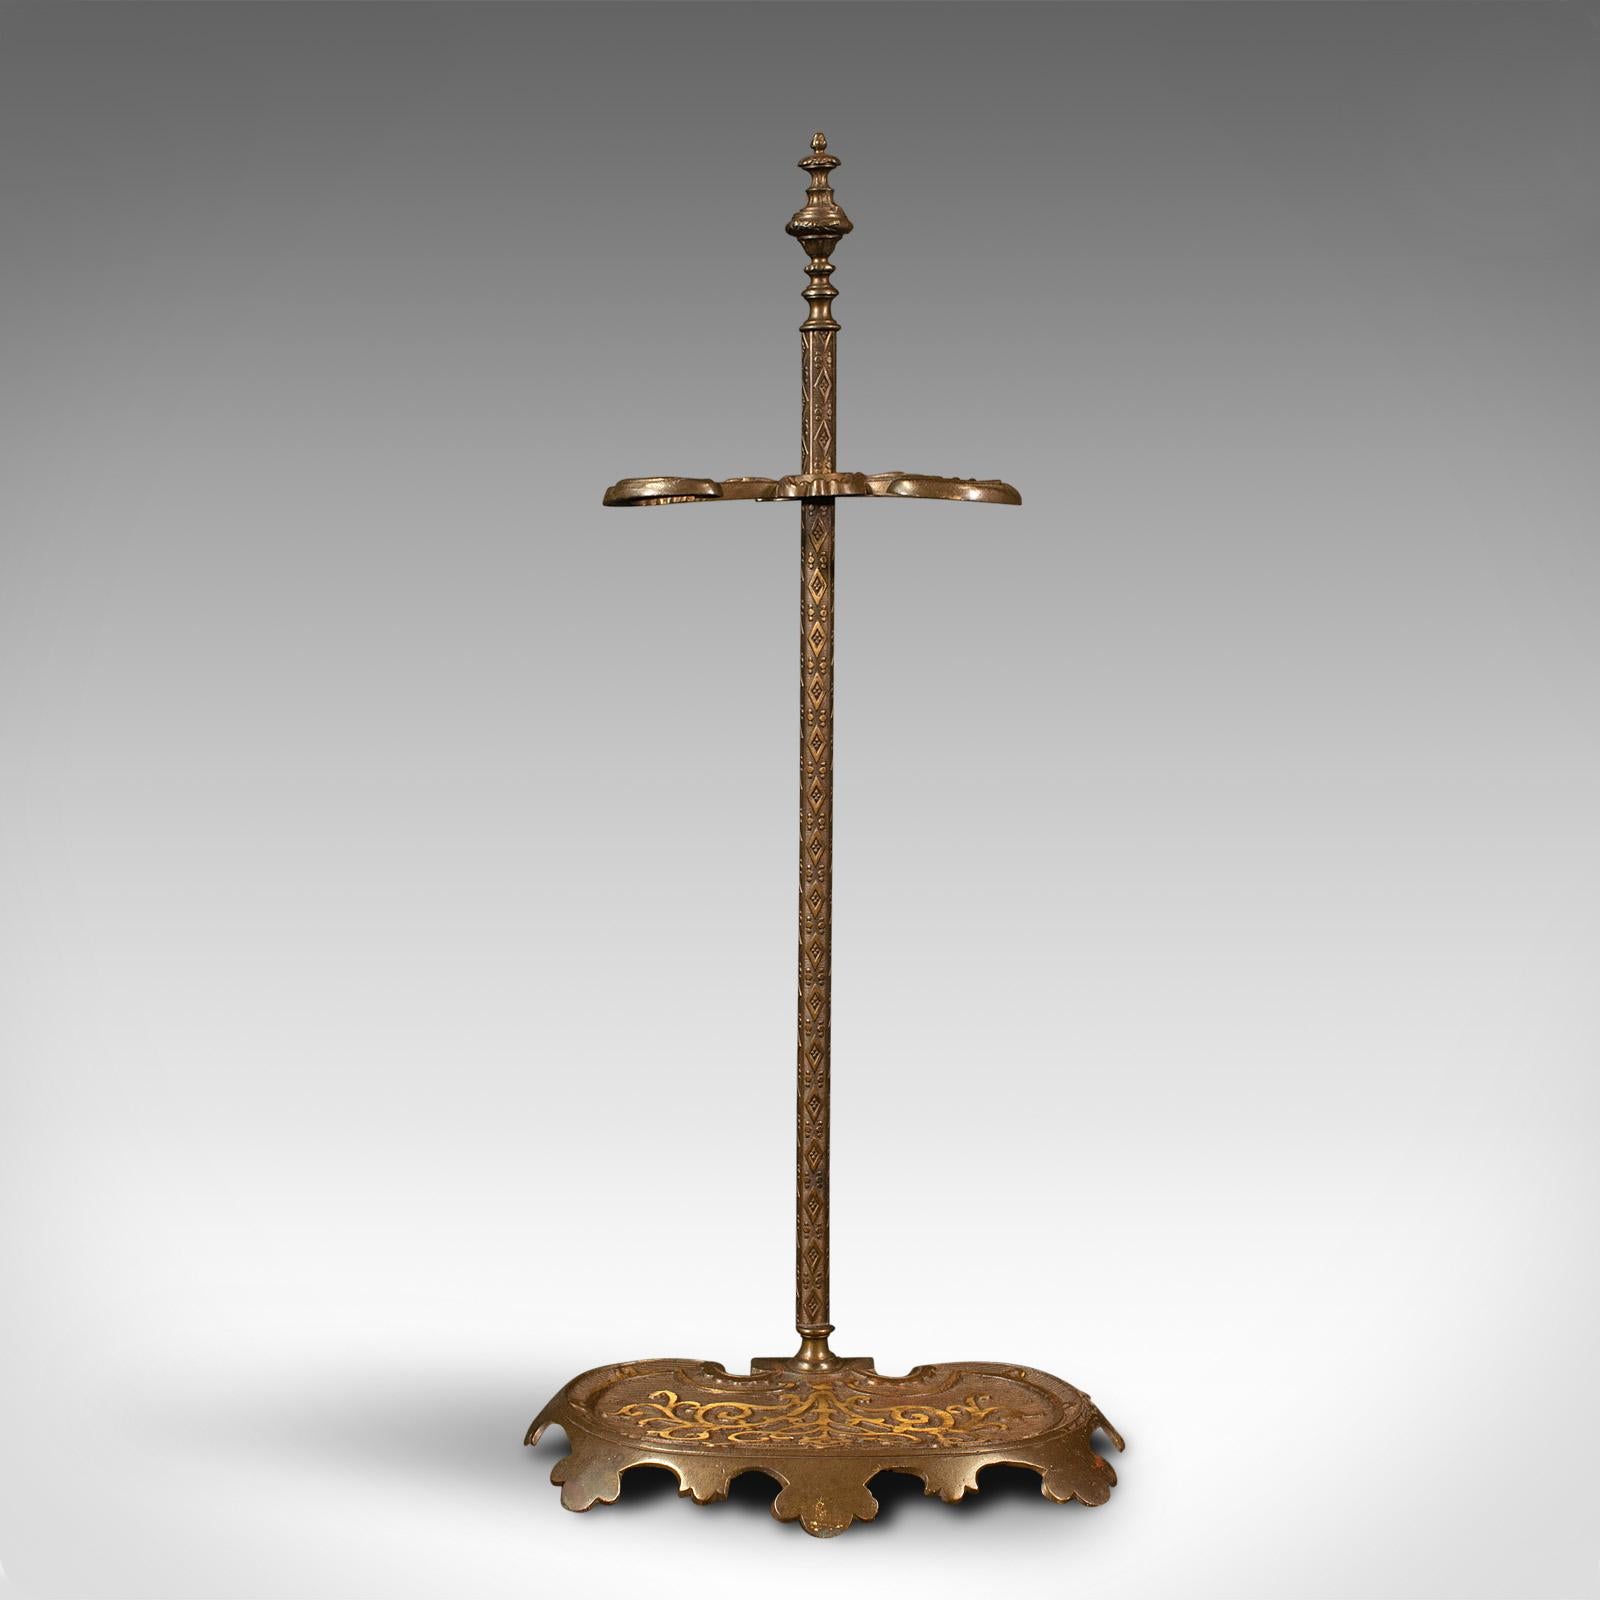 This is an antique Art Nouveau stick stand. An French, cast brass hallway umbrella rack, dating to the Victorian period, circa 1880.

Slender of form with delicate finish, sure to enhance your reception hall
Displays a desirable aged patina and